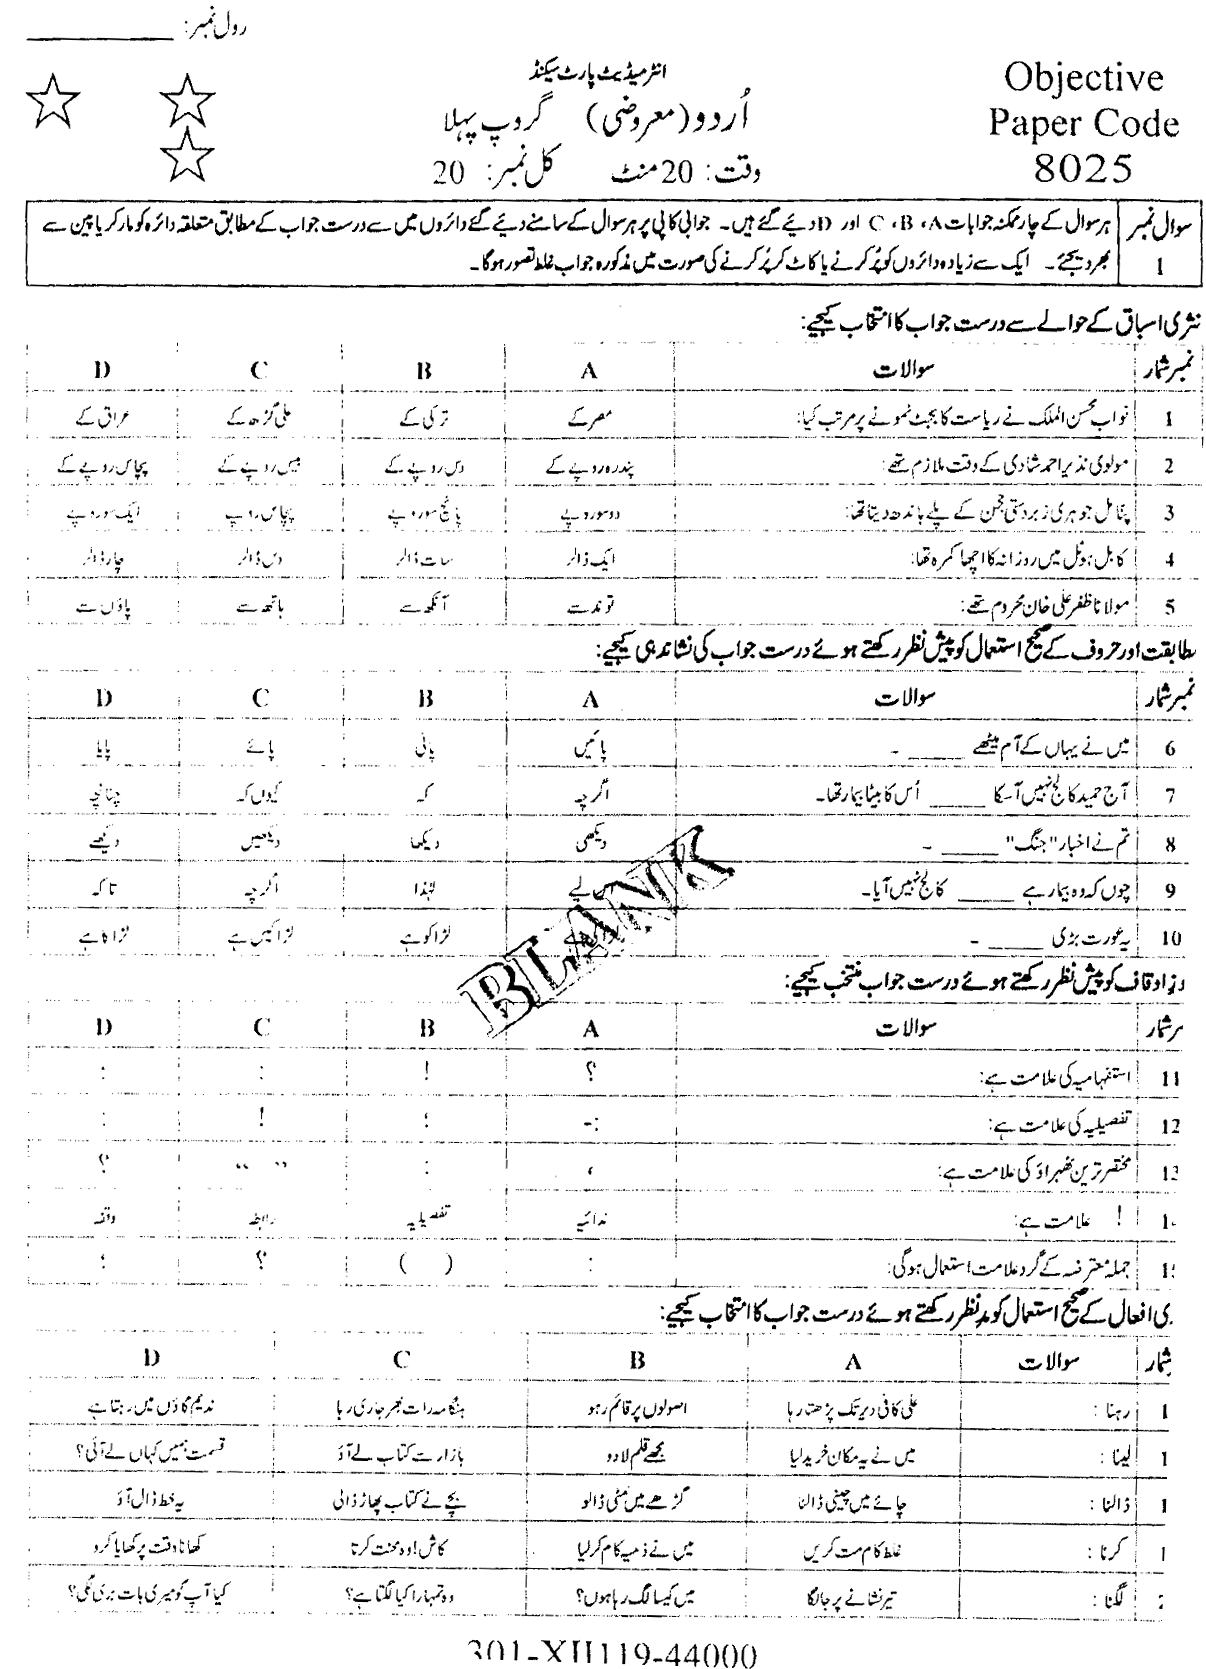 12th Urdu Papers 2019 Faisalabad Objective Group 1